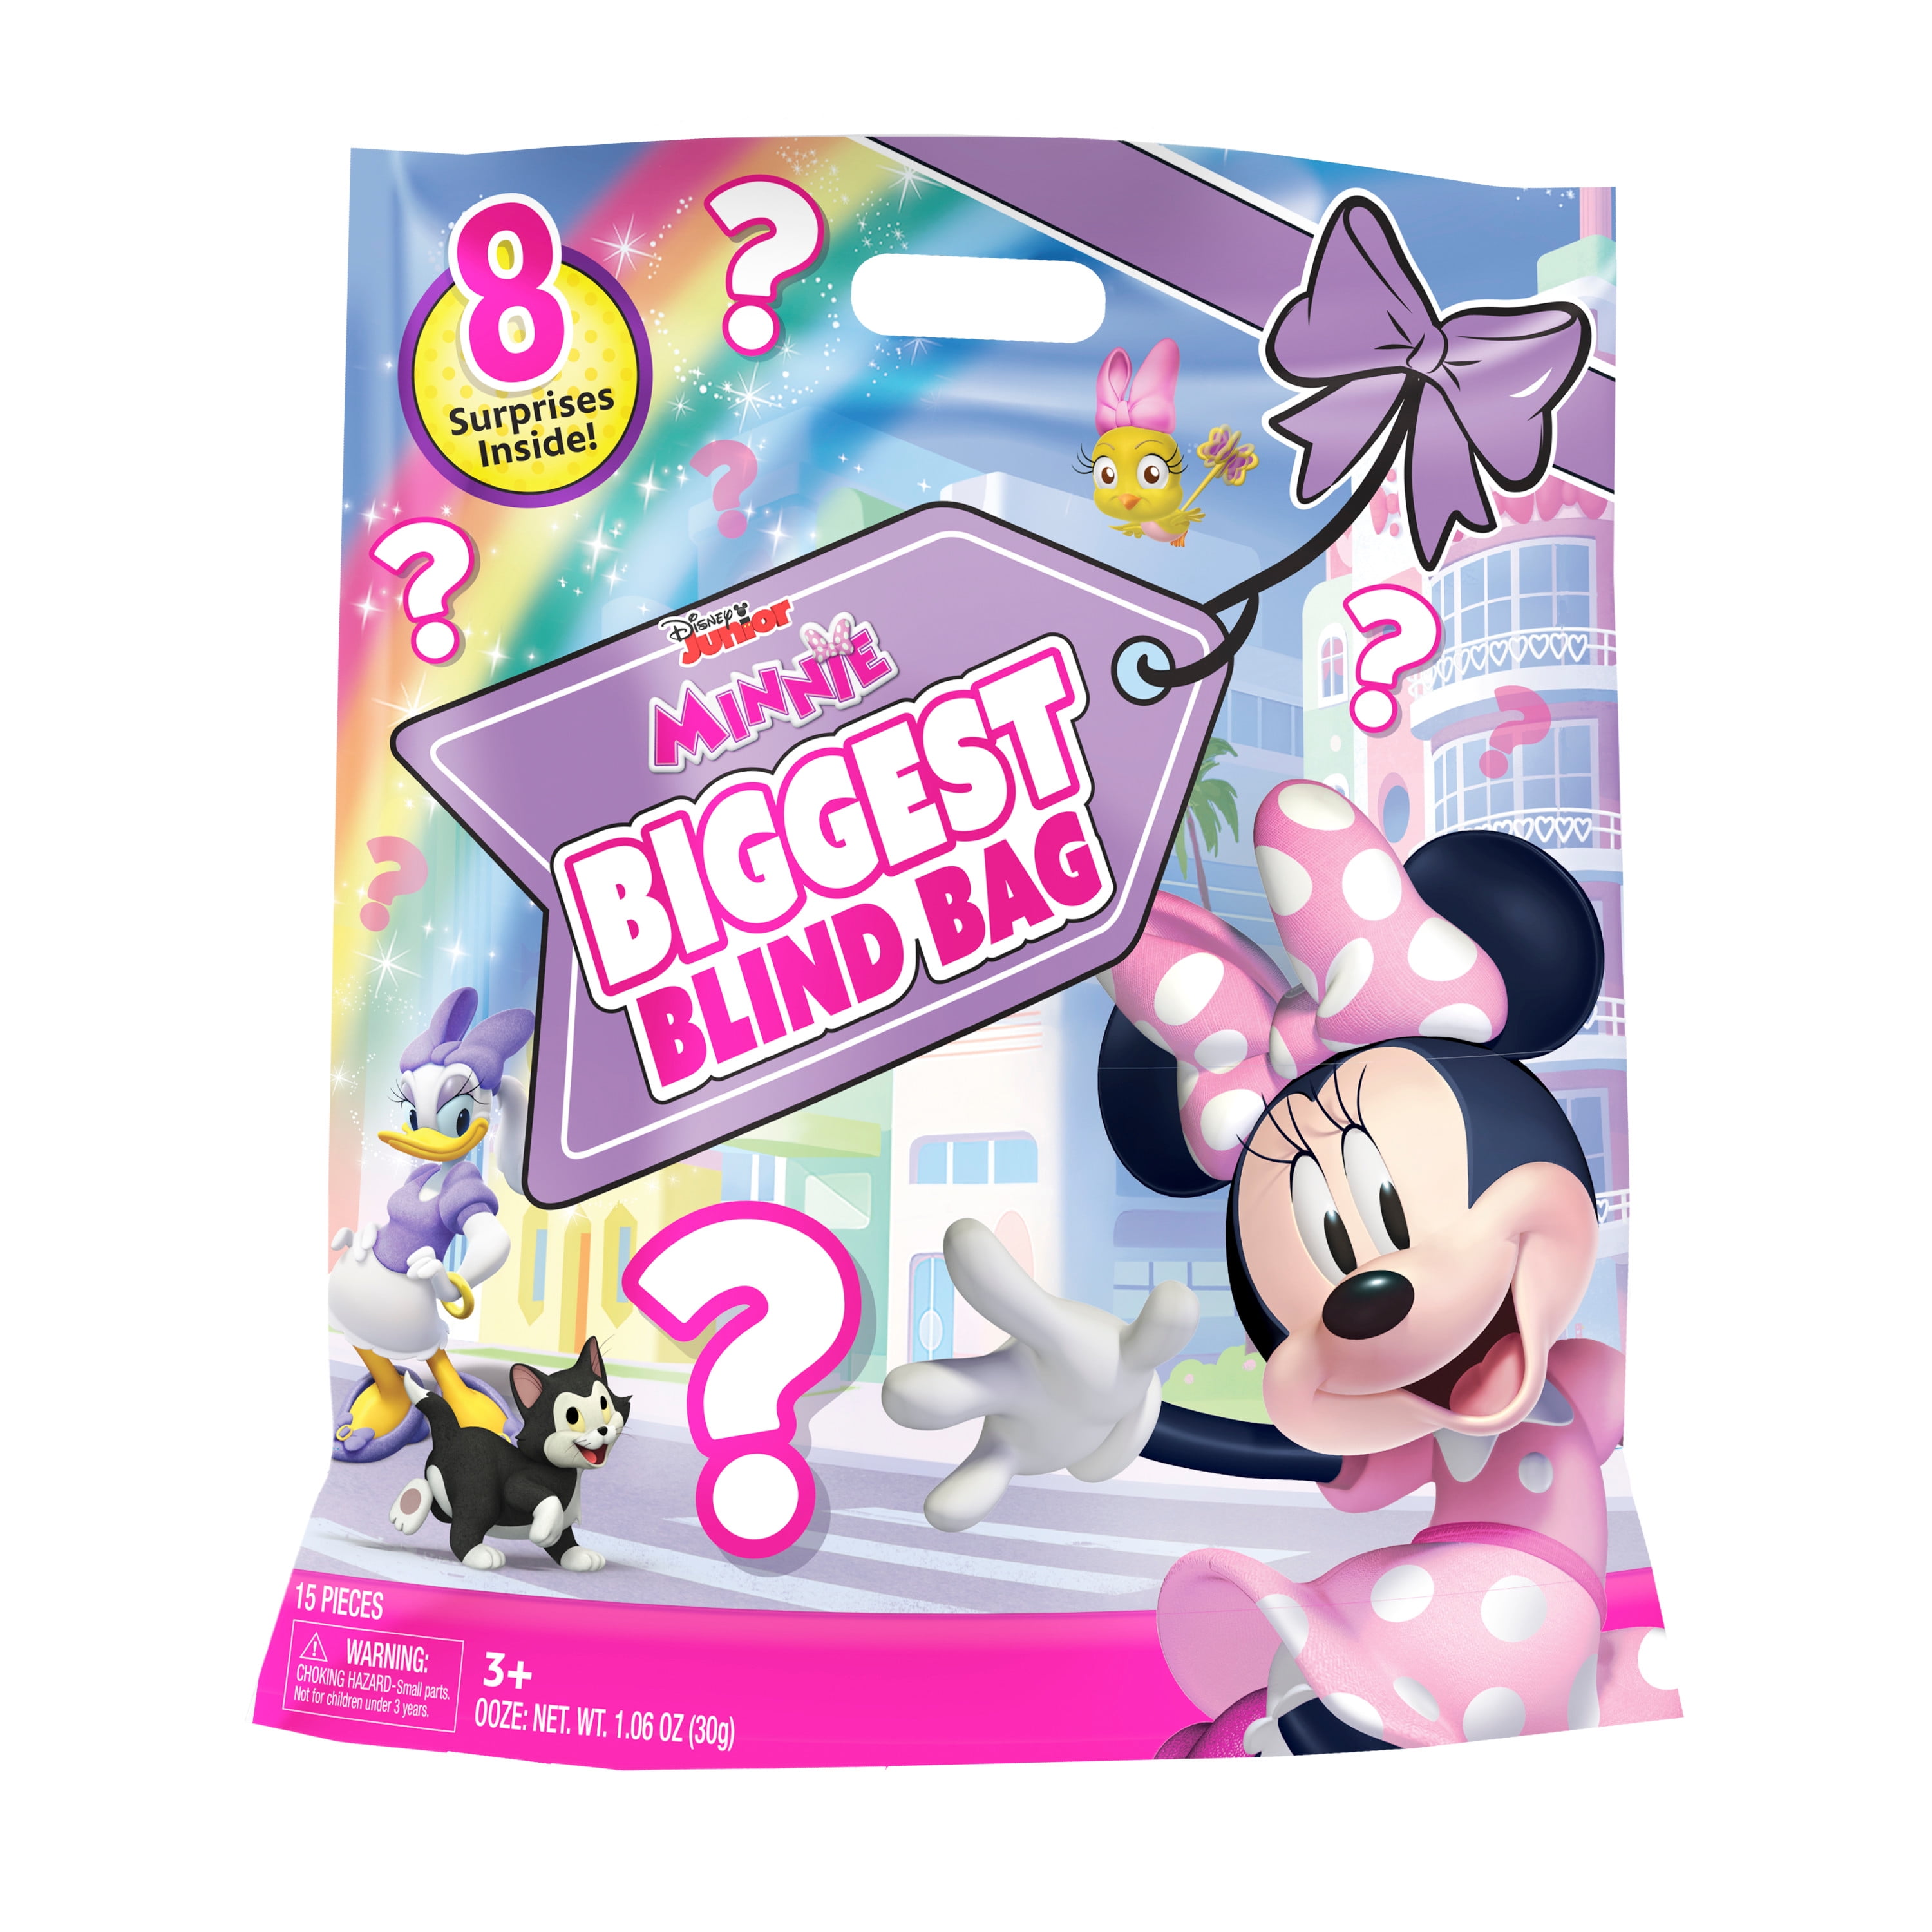 Disney Junior Minnie Mouse Biggest Blind Bag, Officially Licensed Kids Toys for Ages 3 Up, Gifts and Presents